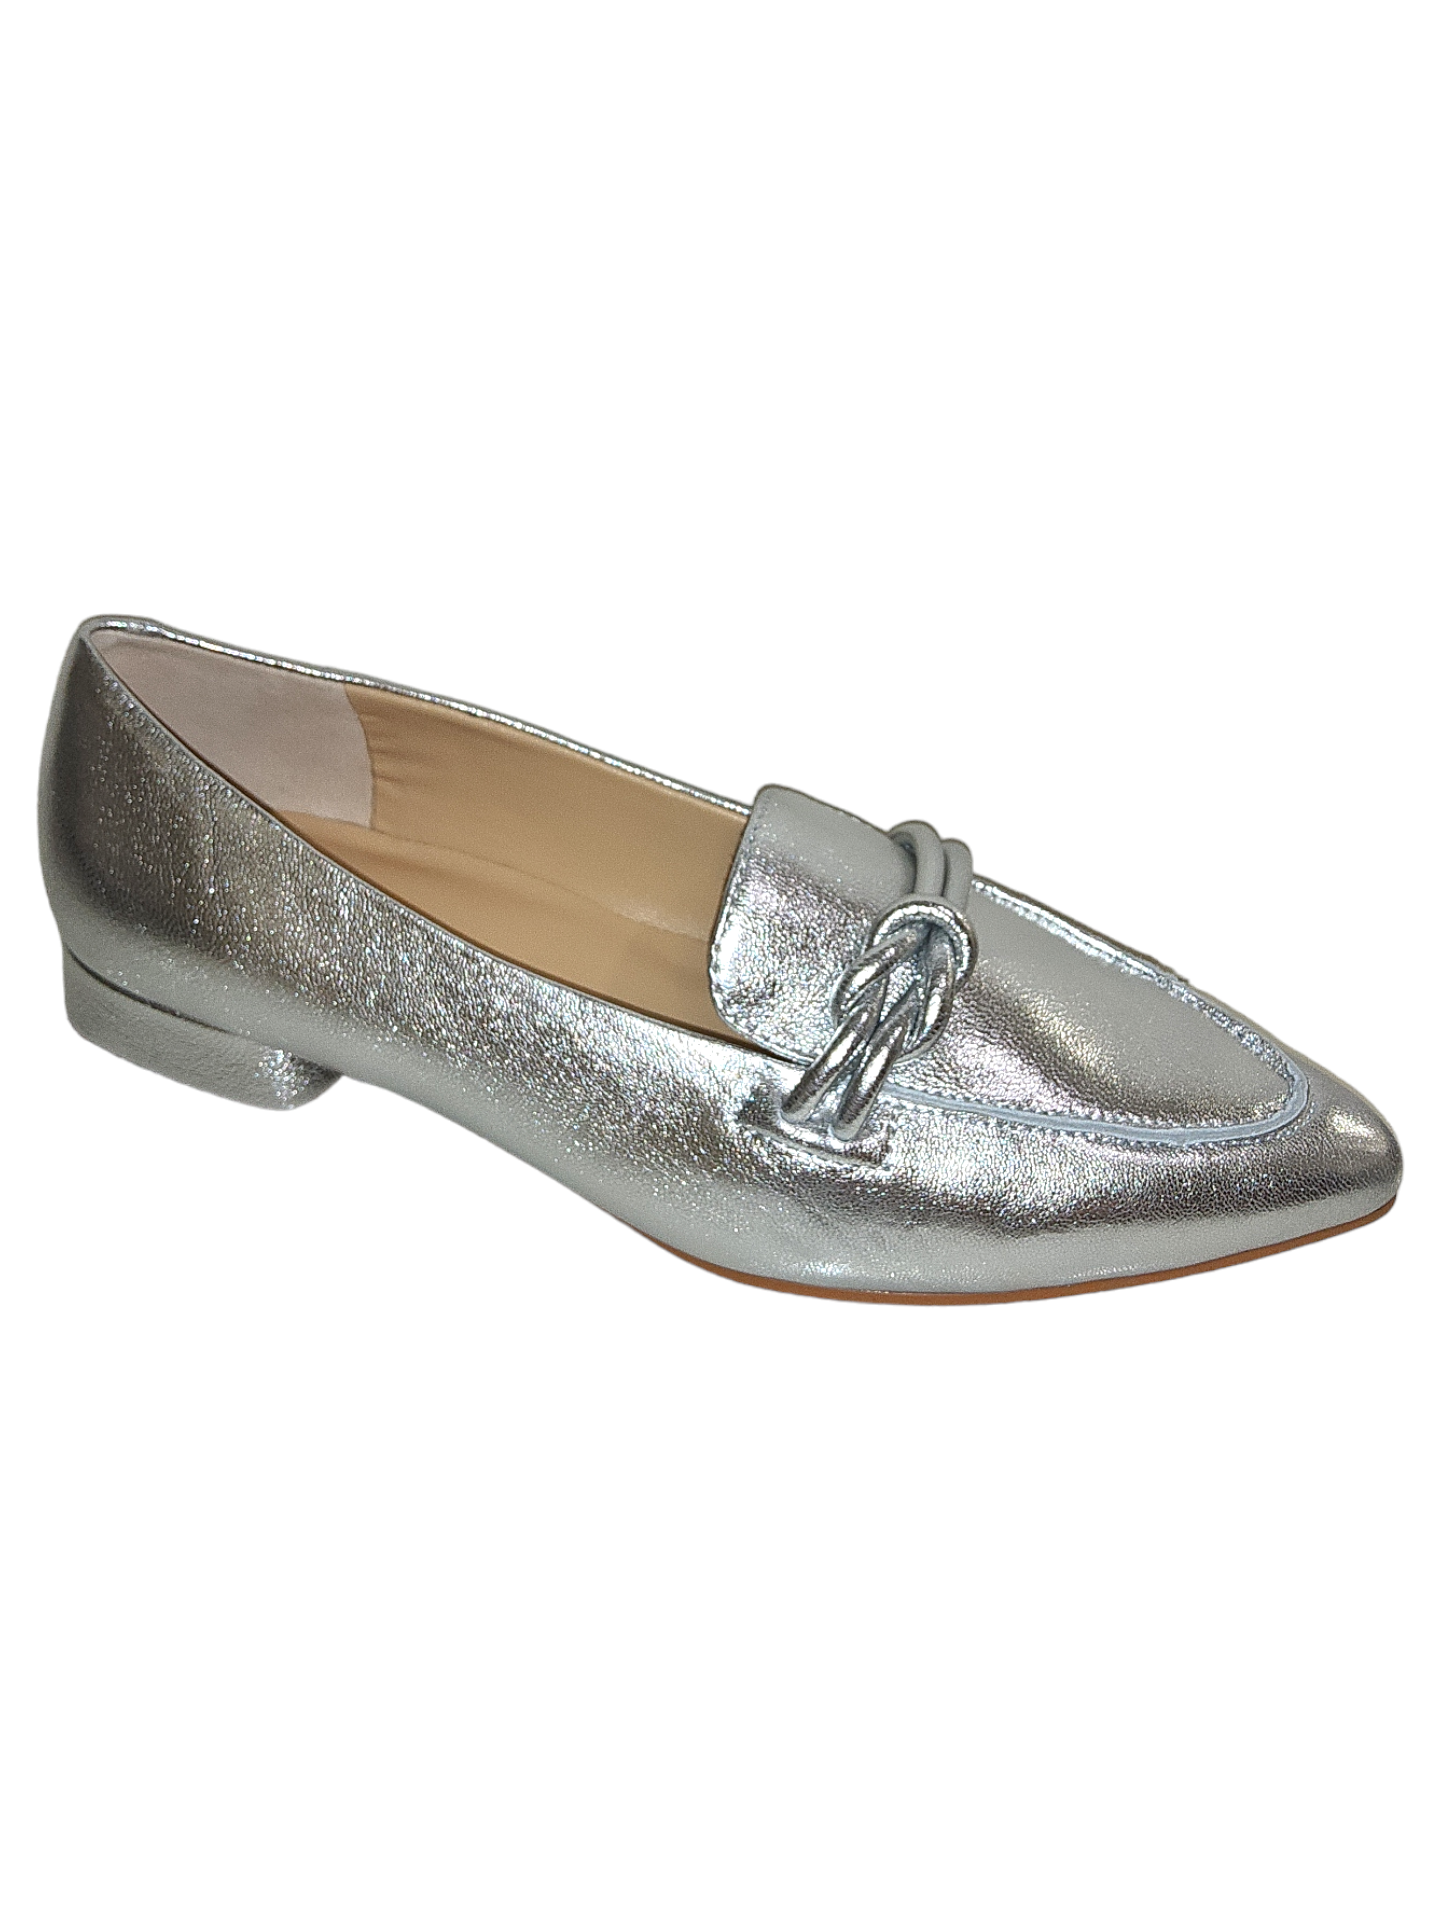 Silver leather shoe